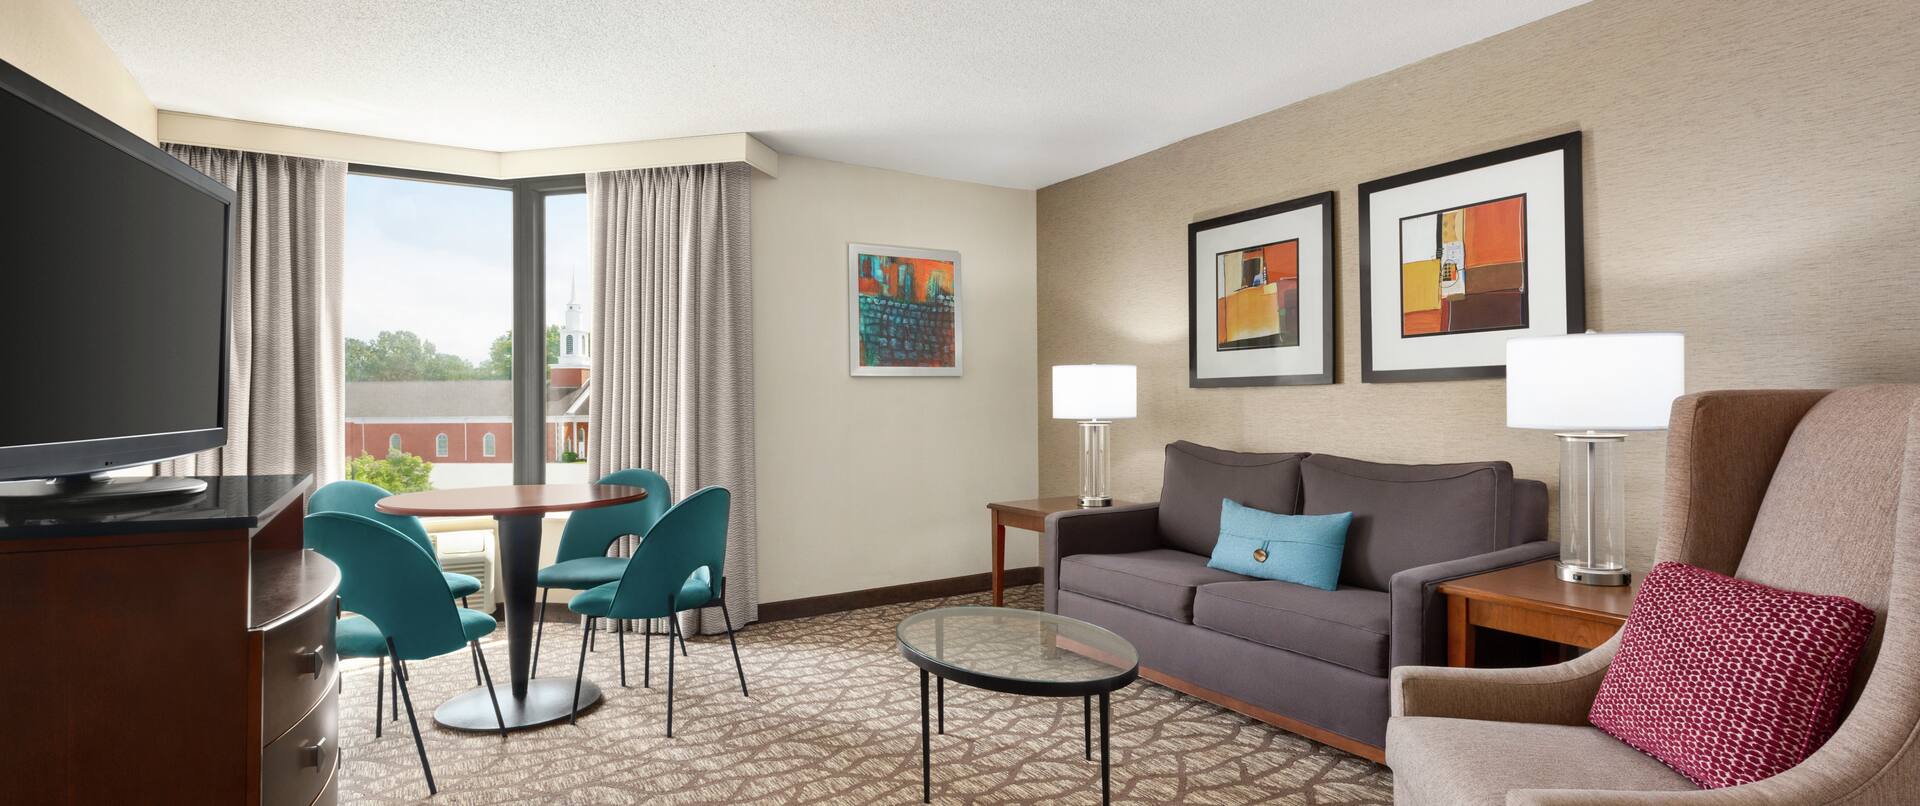 Spacious living area in parlour suite featuring comfortable seating, TV, and dining table.